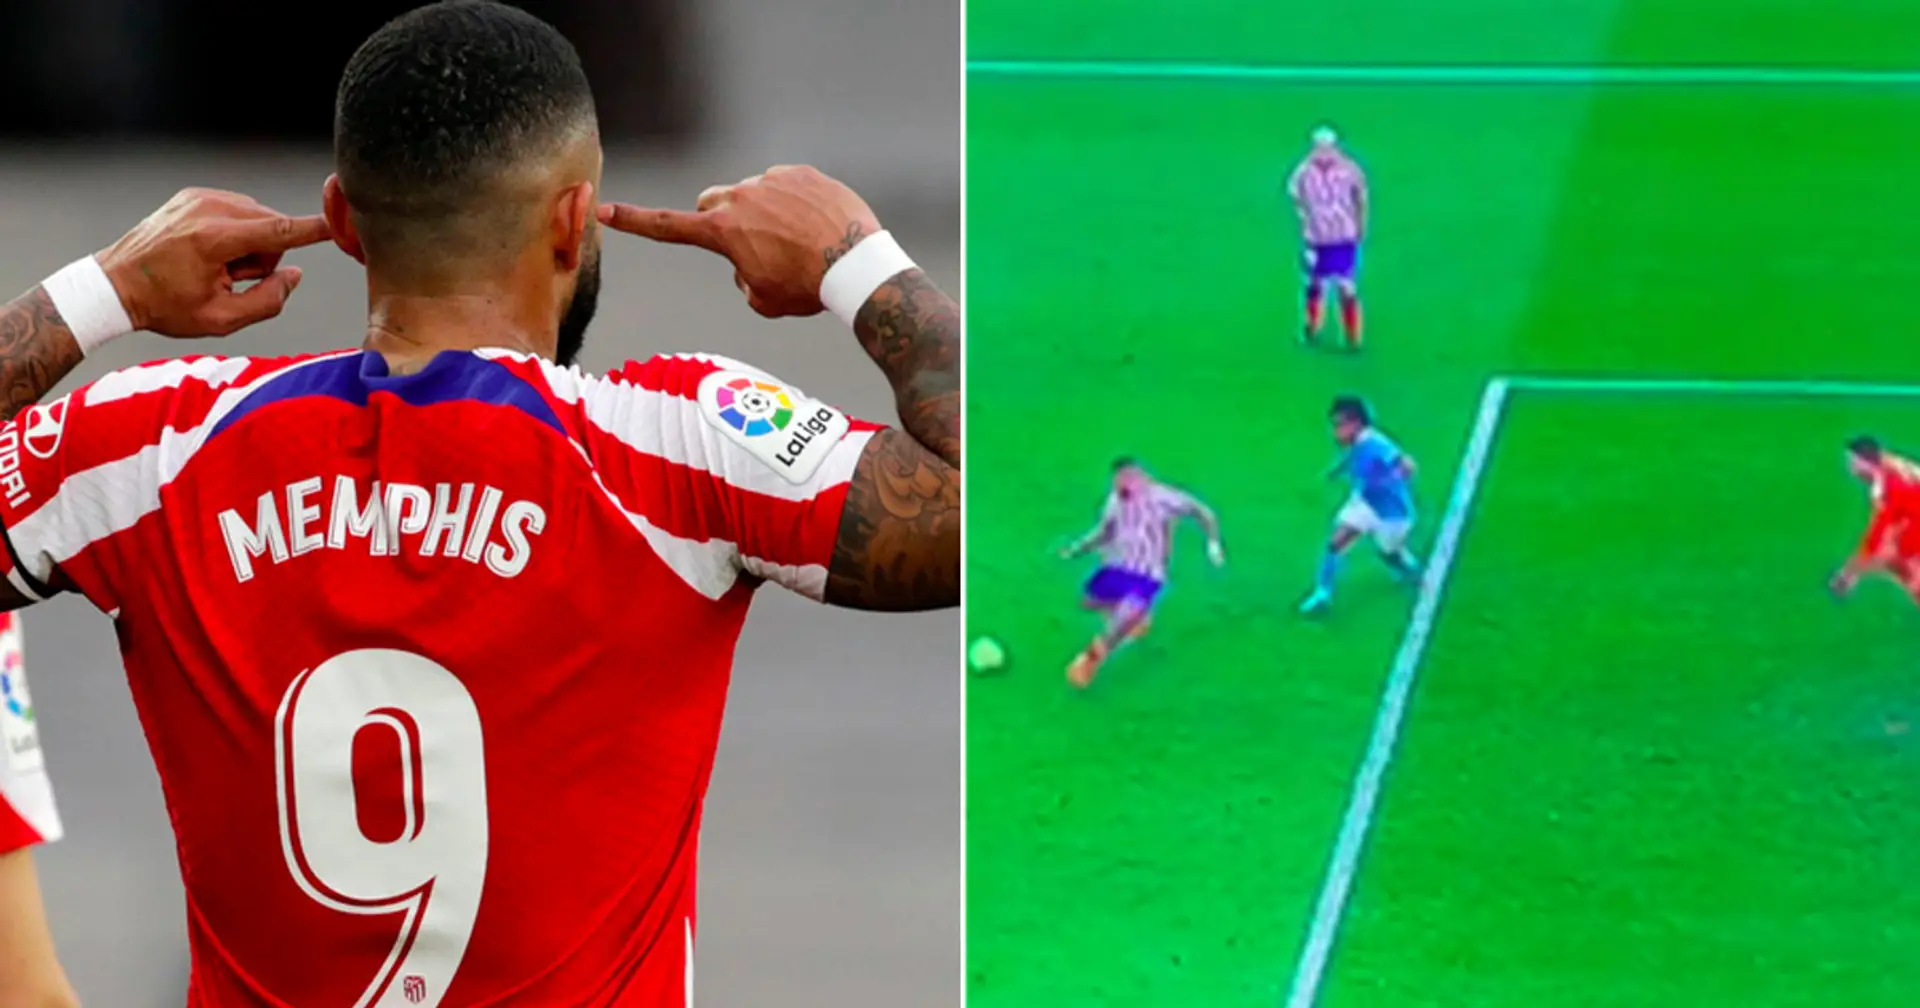 Memphis scores debut goal for Atletico – an 89th-minute winner